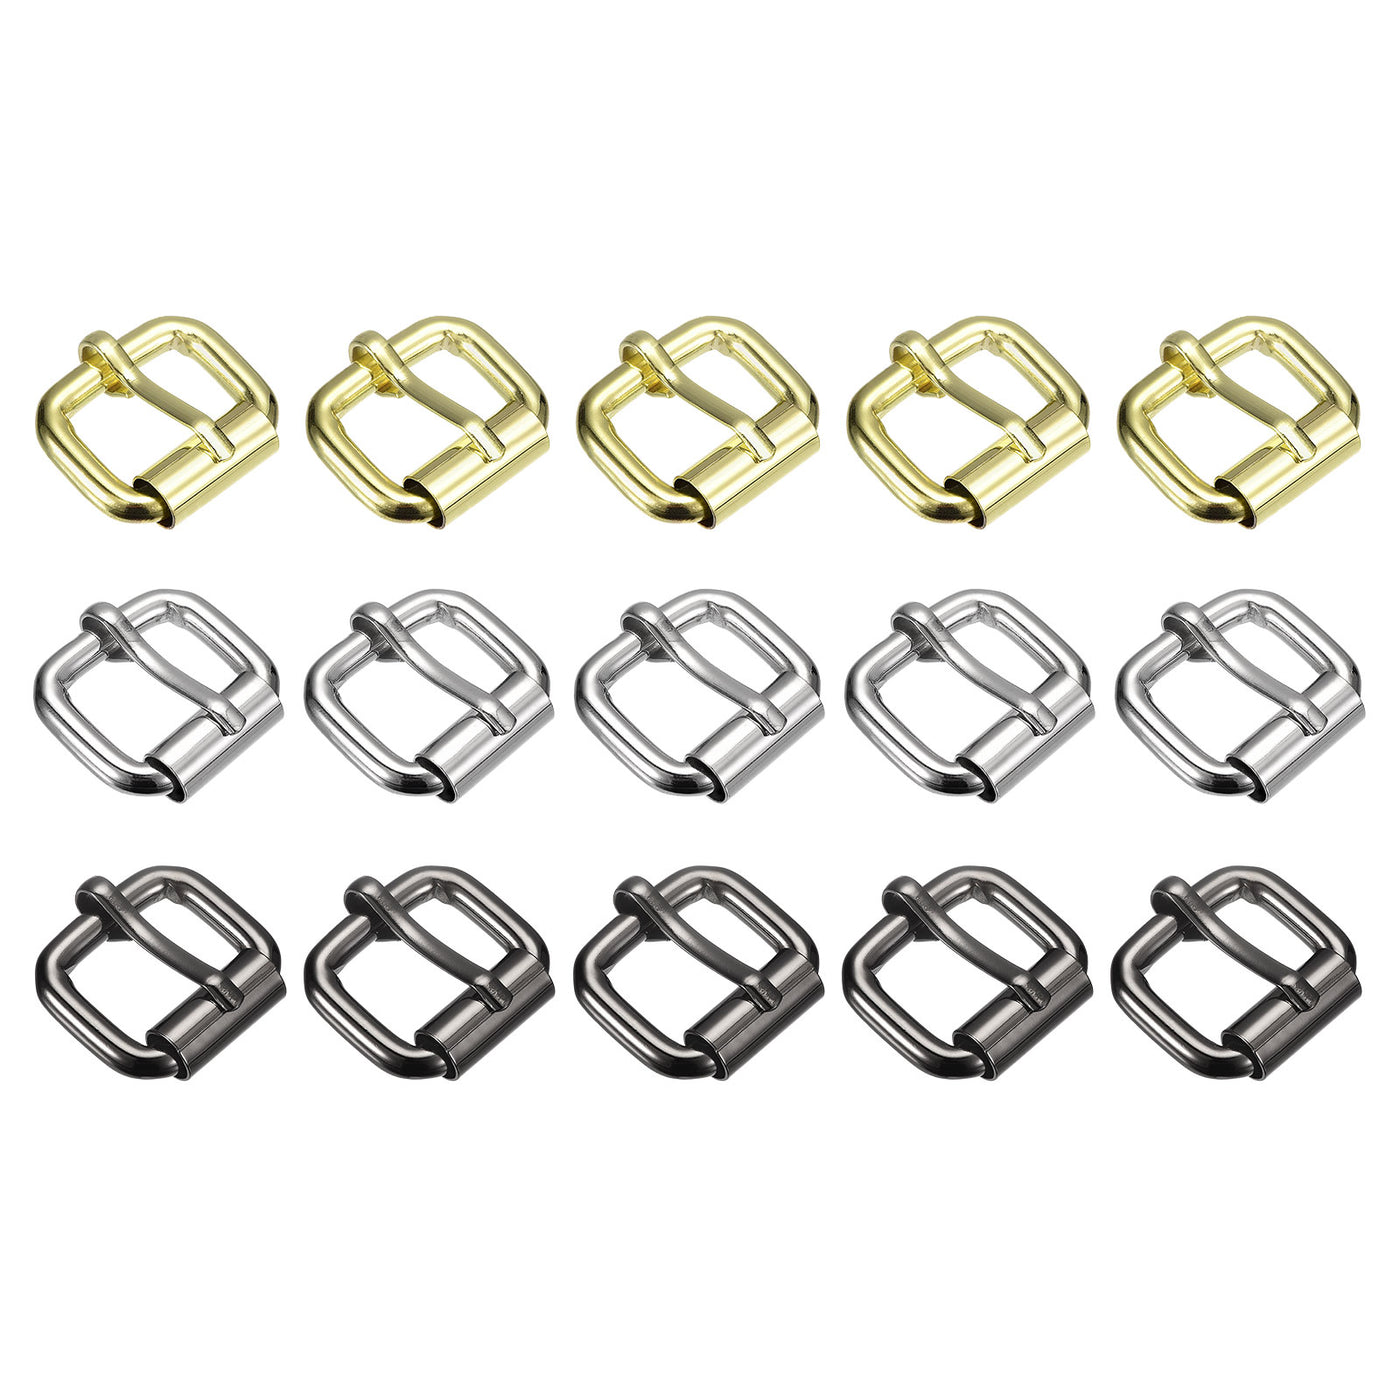 uxcell Uxcell Roller Buckles, 15pcs 20x15mm 4.8mm Thick Metal Belt Pin Buckle, 3 Colors